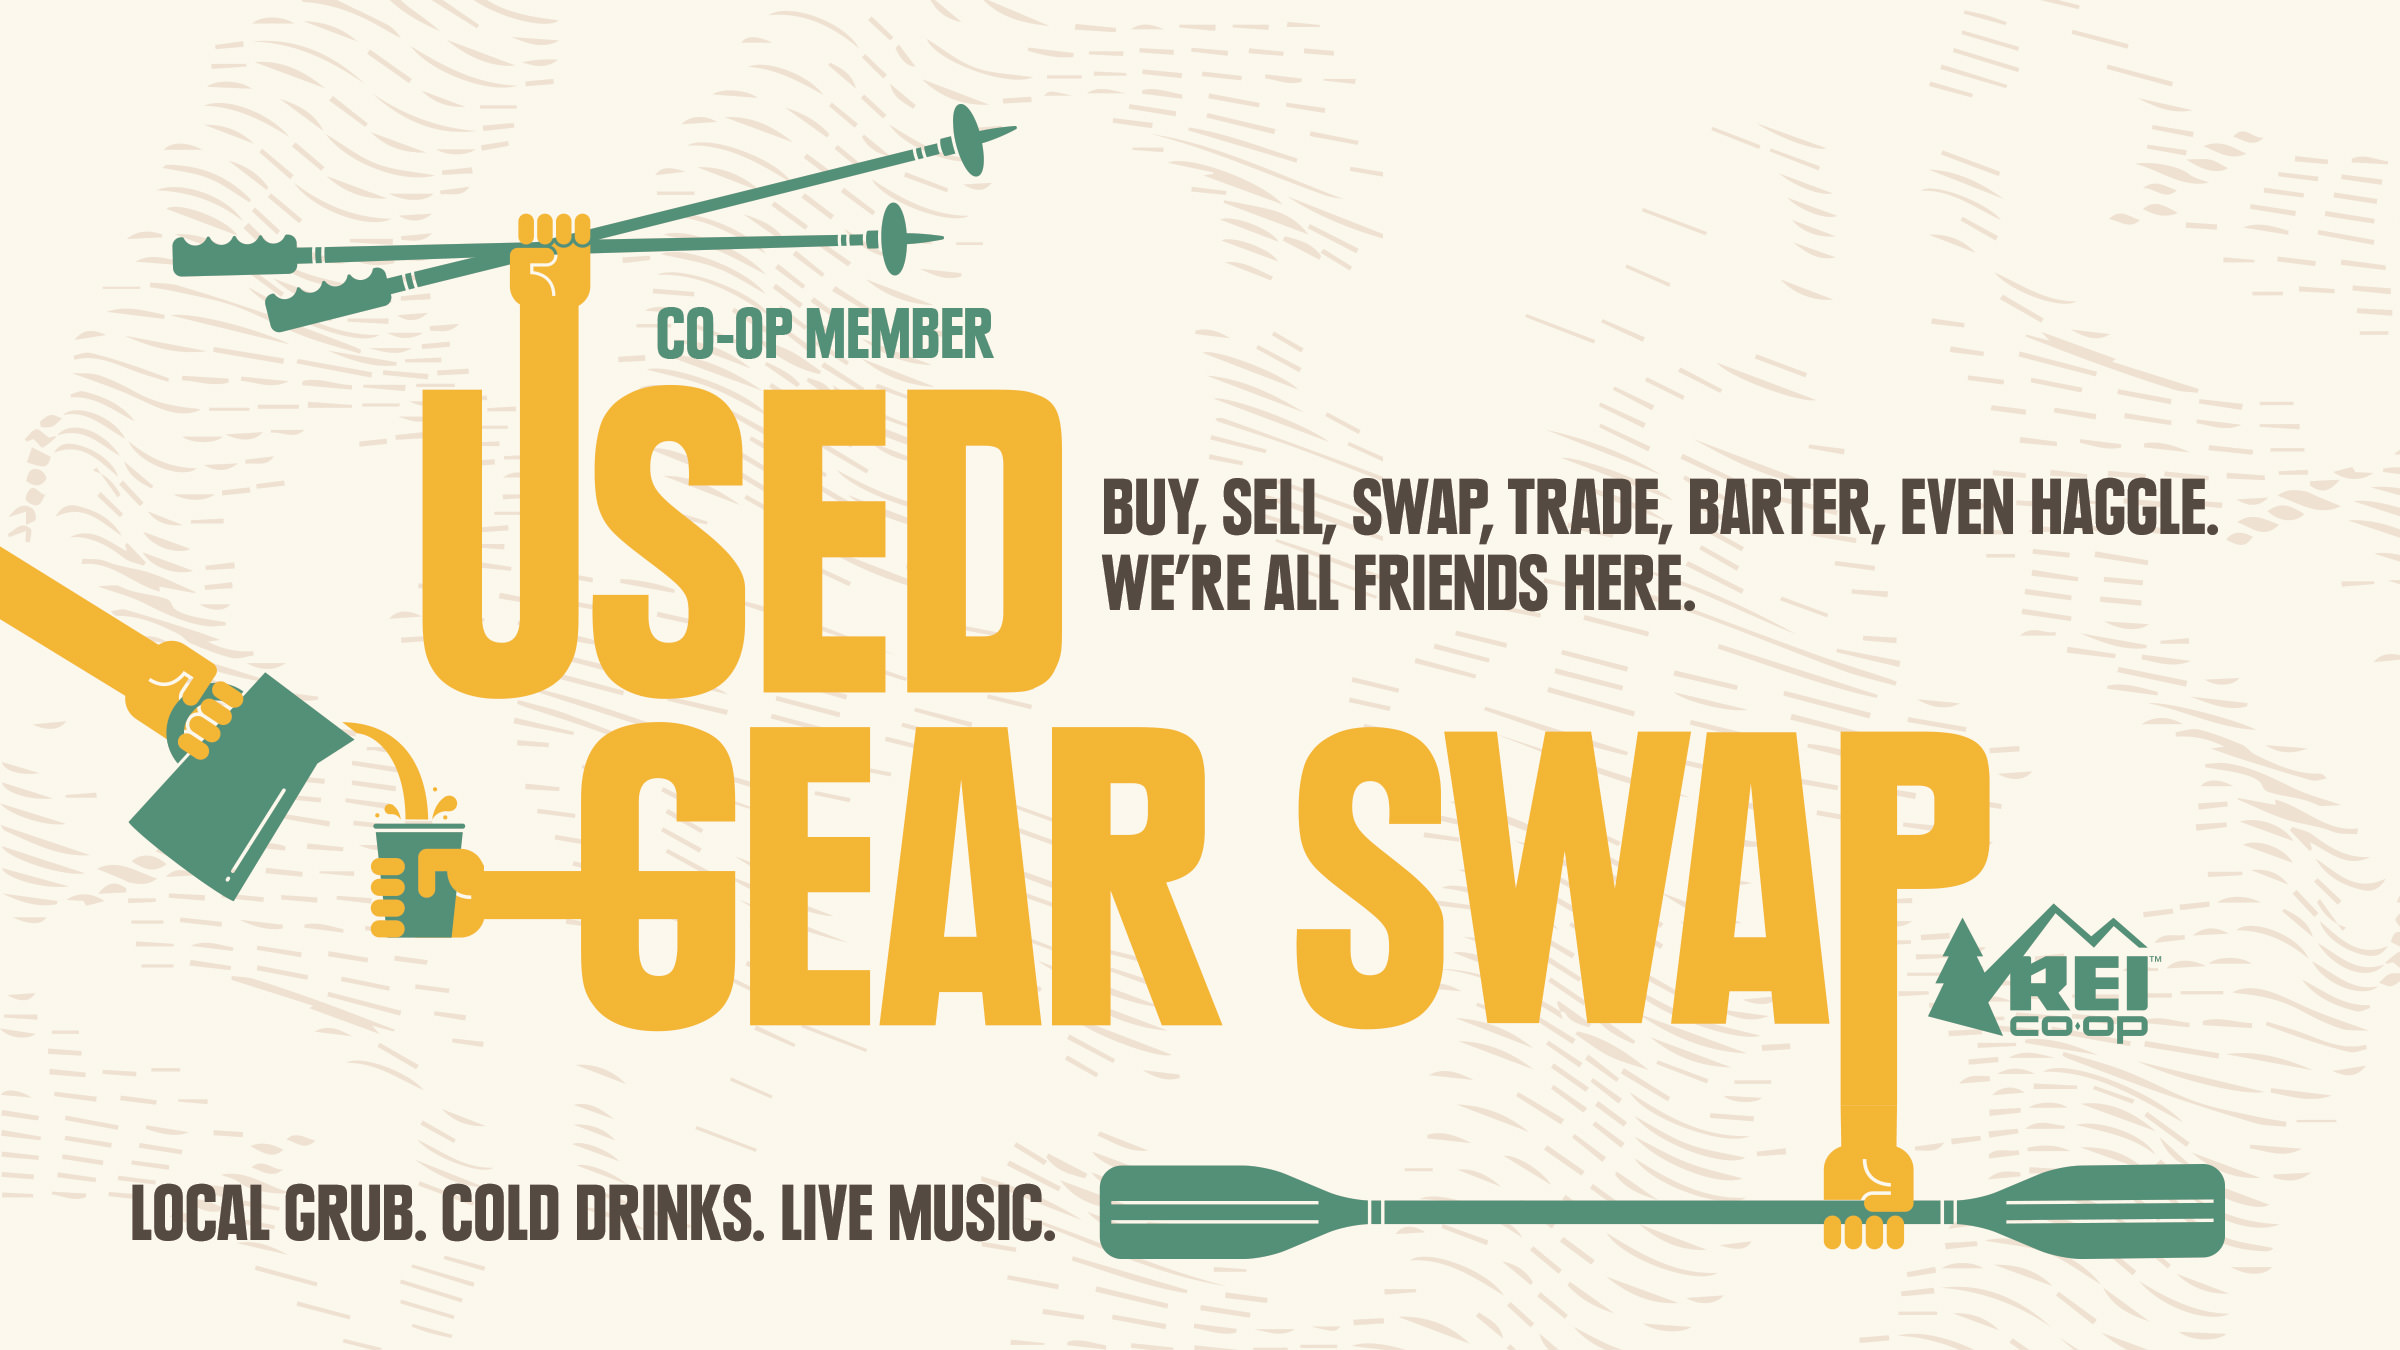 Rei often has local used gear or garage sales where you can get some great gear on the cheap.